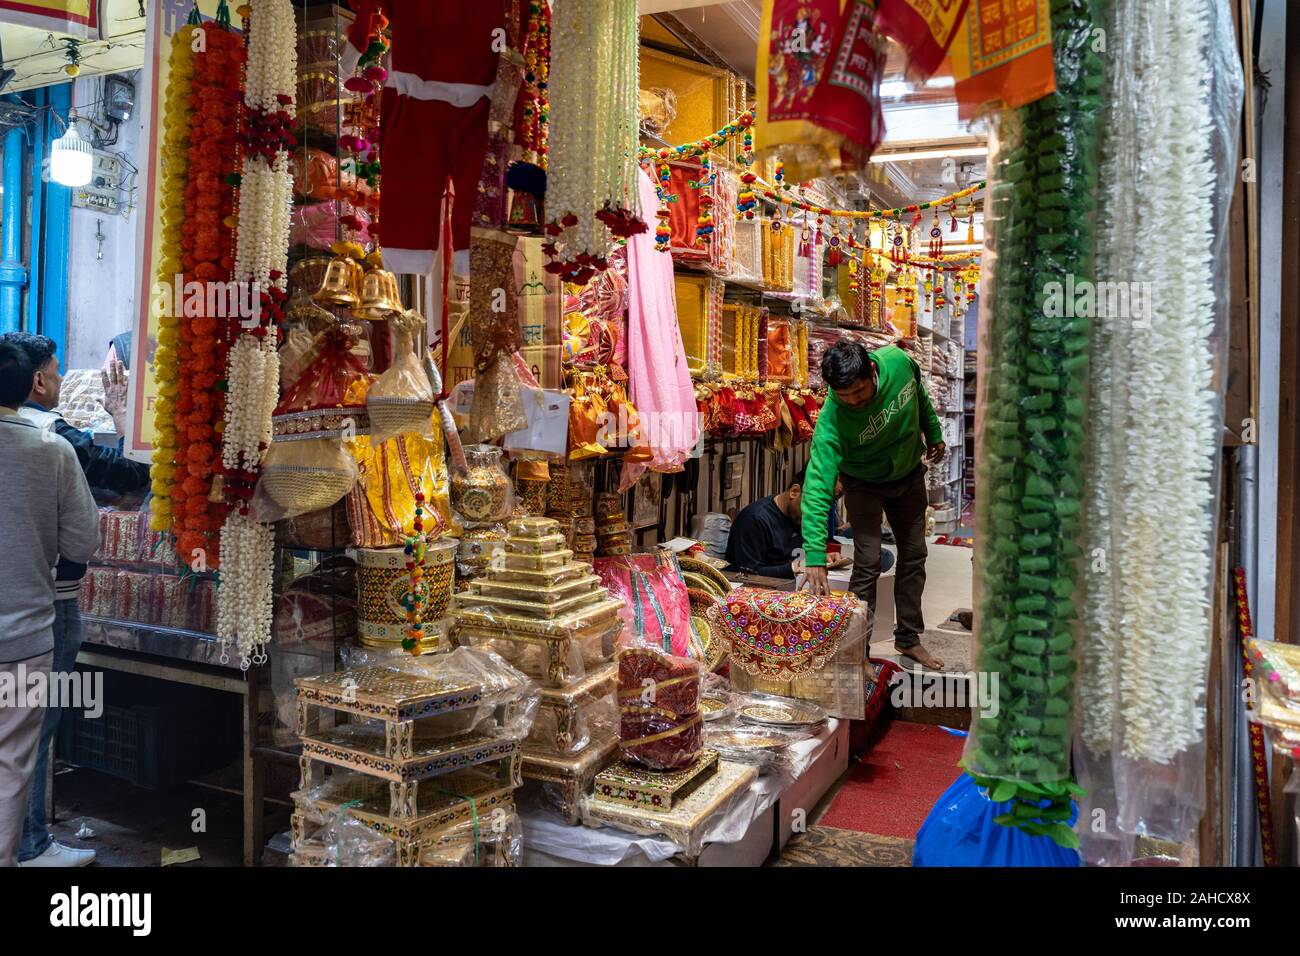 Delhi, India - December 14, 2019: Crowded Chandi Chowk market in Old Delhi, people shopping for wedding attire and decorations in the market Stock Photo